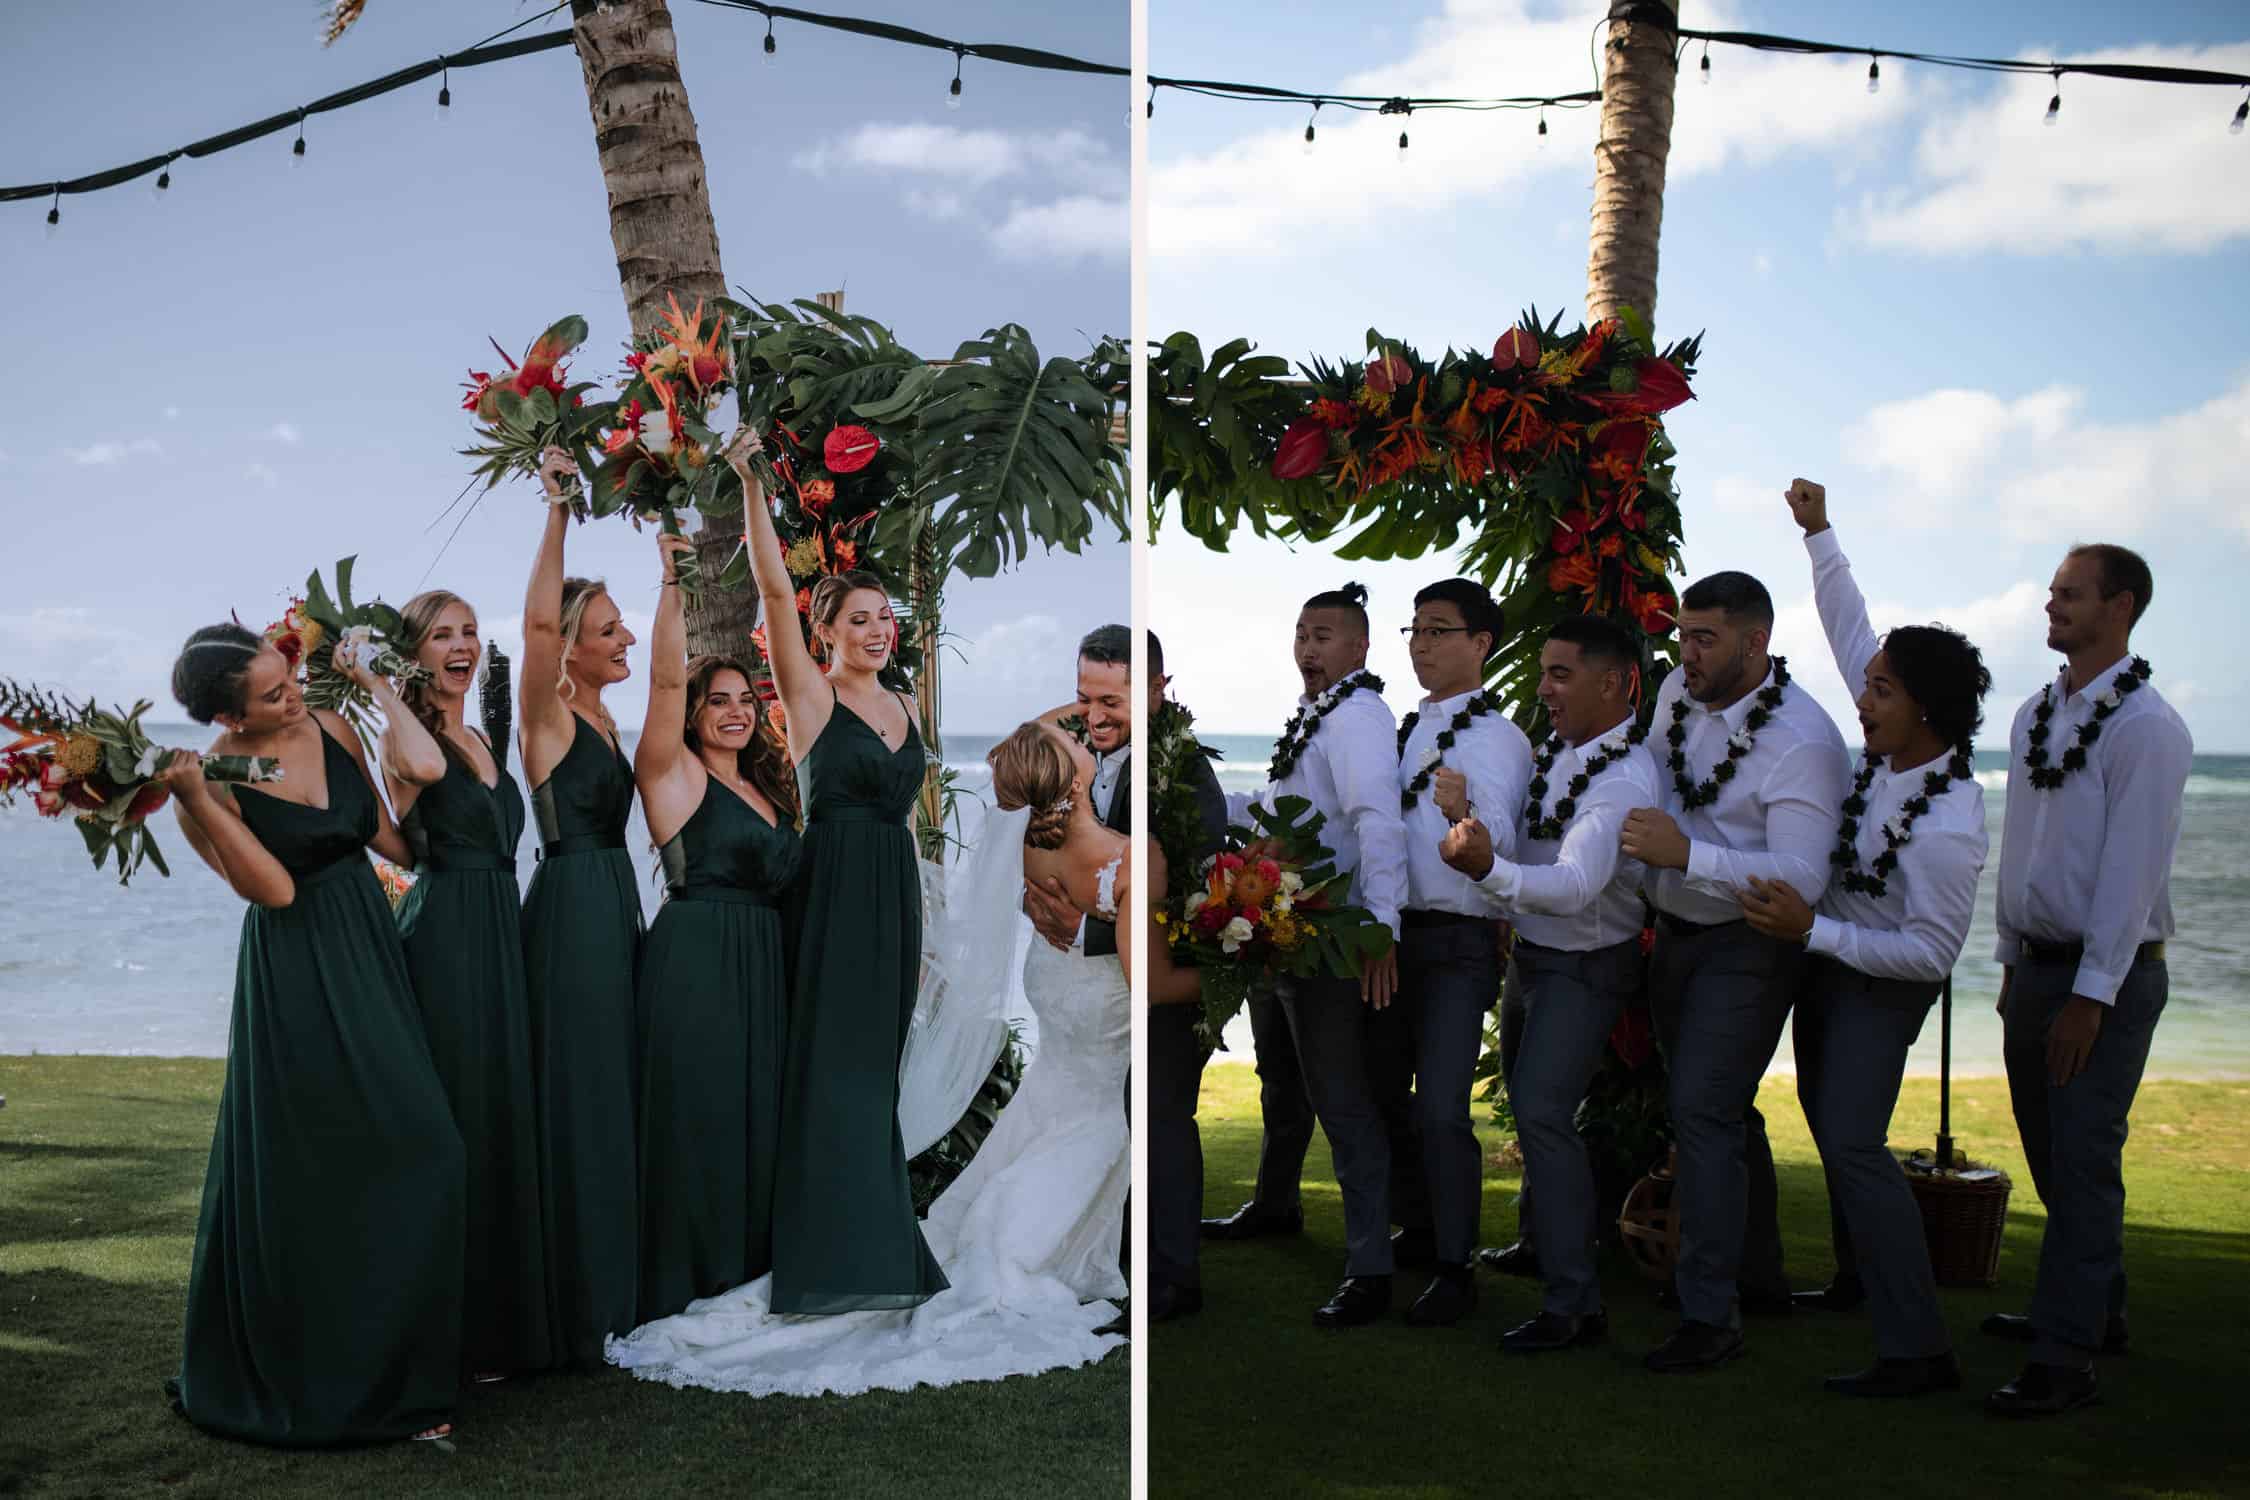 5 tips on how to get best use out of your presets by Anela Benavides, Hawaii wedding and engagement photographer. This blog post includes editing tips, Lightroom presets, moody presets, moody Lightroom presets, tips for photographers, and photography inspiration. #photography #photographytips #lightroom #presets #lightroompresets